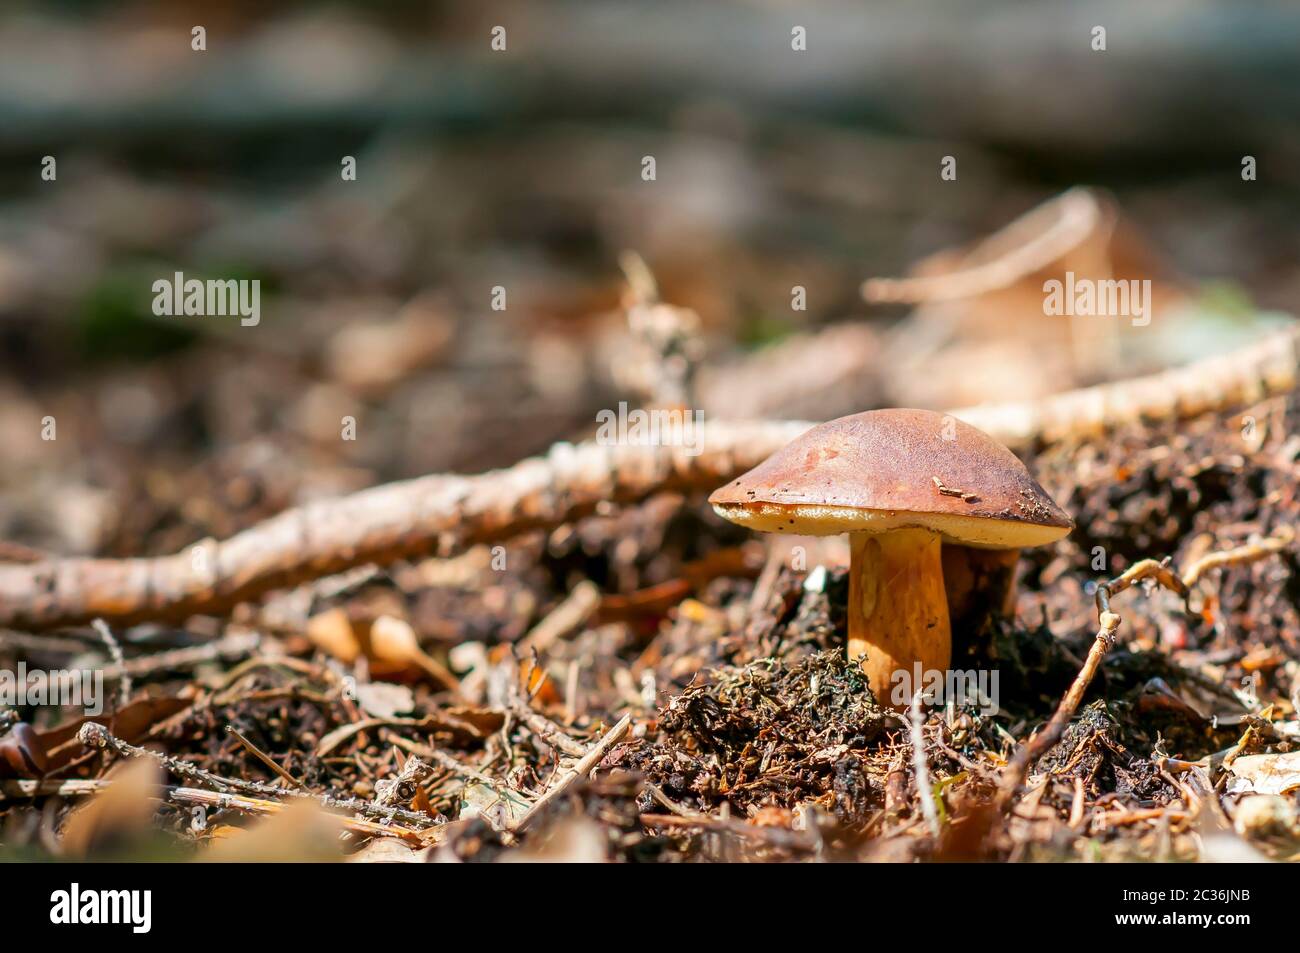 Imleria badia, commonly known as the bay bolete, Edible fungus in the forest Stock Photo